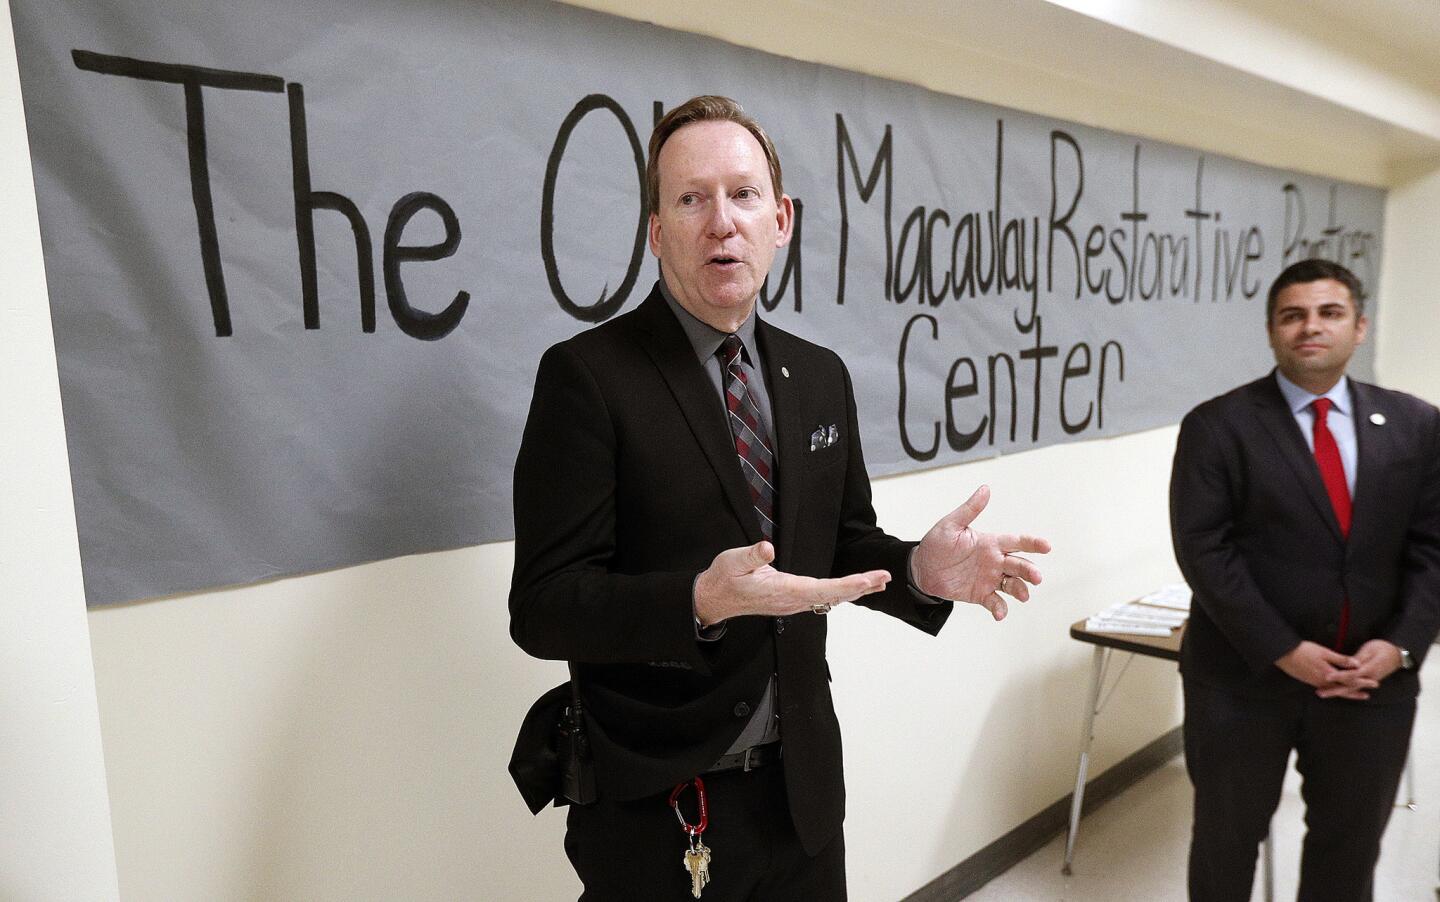 Glendale High School Principal Benjamin Wolf talks about the support he received from the district for classroom 4313 at the dedication of the room, the Olivia Macaulay Restorative Practices Room, at Glendale High School on Wednesday, February 27, 2019.